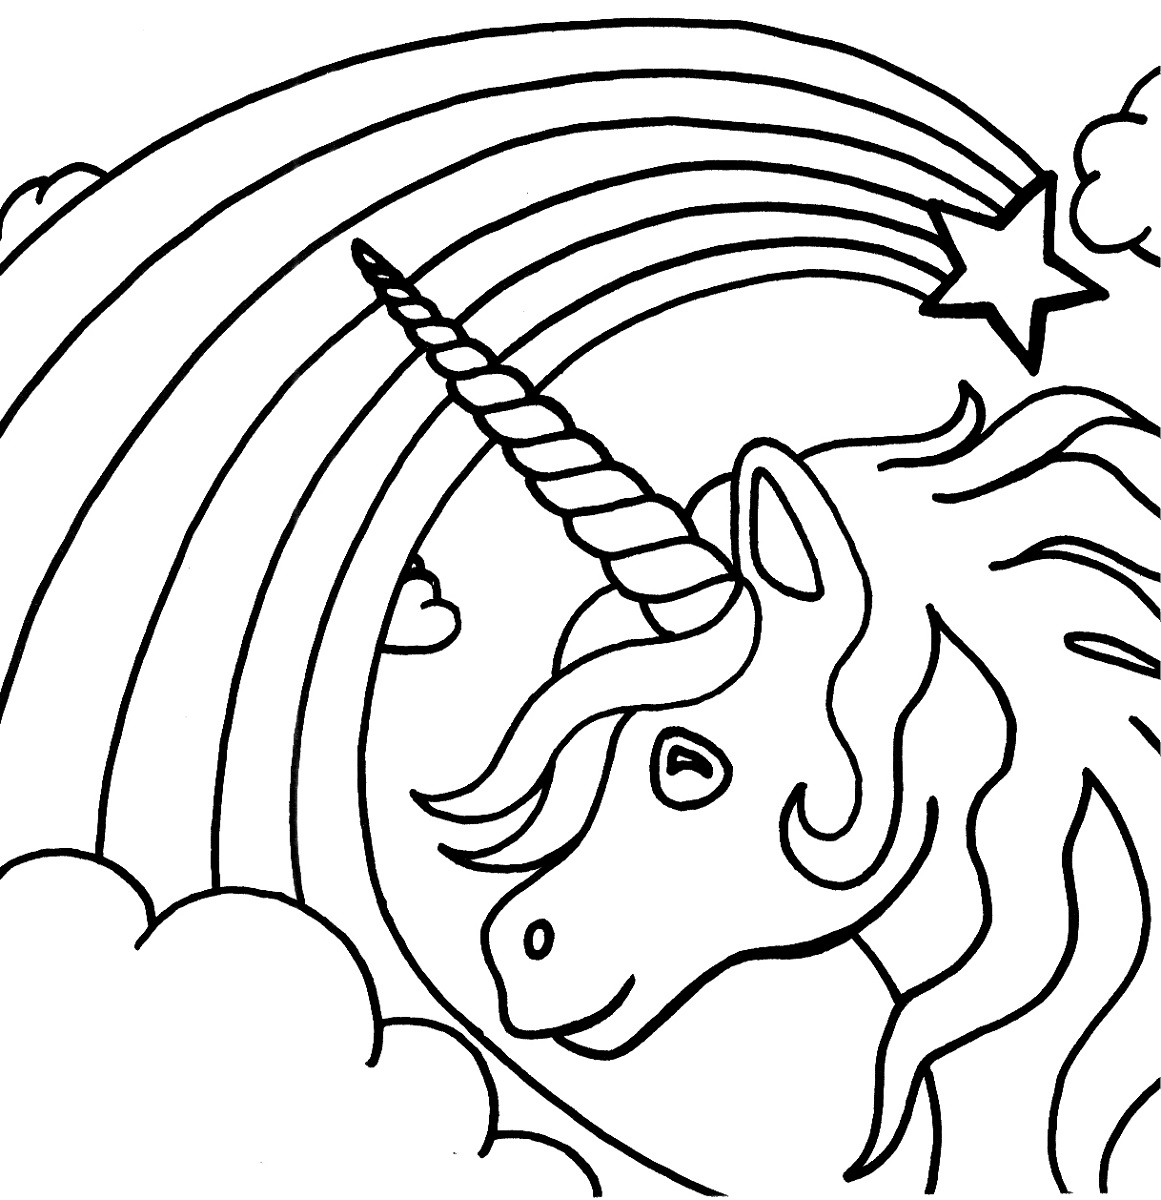 Unicorn Coloring Pages For Kids at GetColorings.com | Free printable colorings pages to print ...